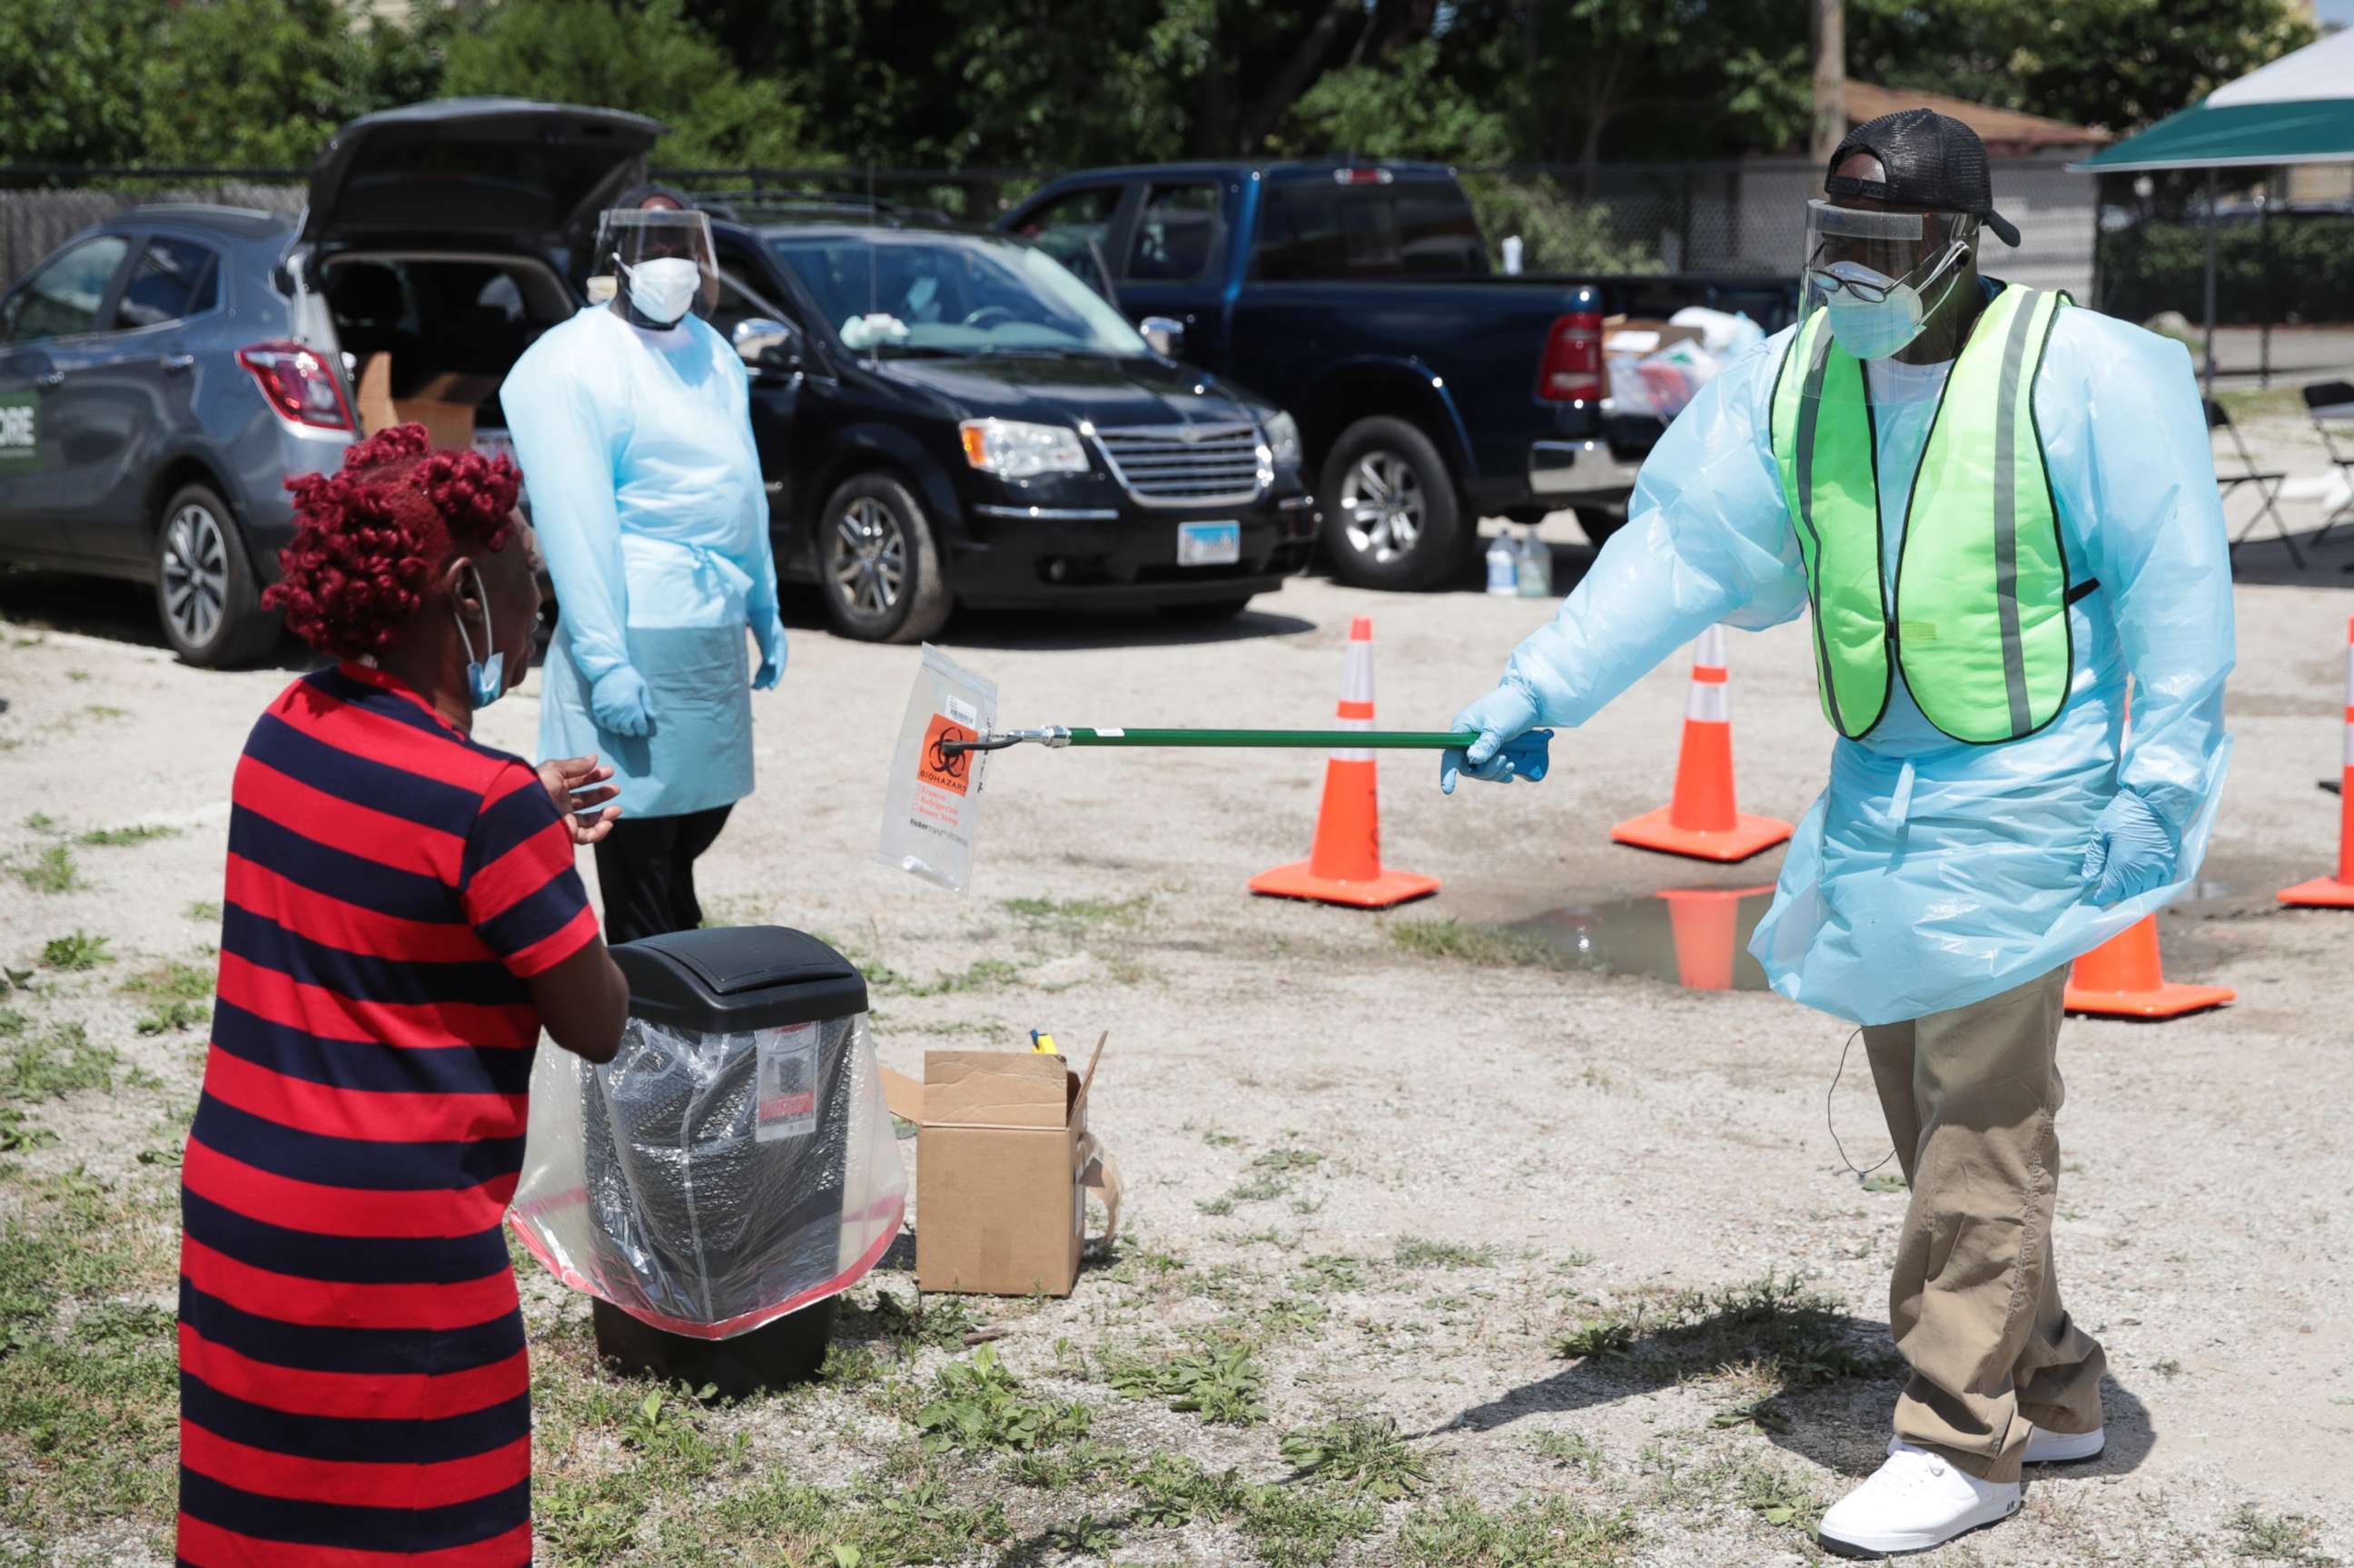 PHOTO: Workers help residents process a COVID-19 self-test at a mobile COVID-19 testing site set up in the Austin neighborhood of Chicago, June 23, 2020.